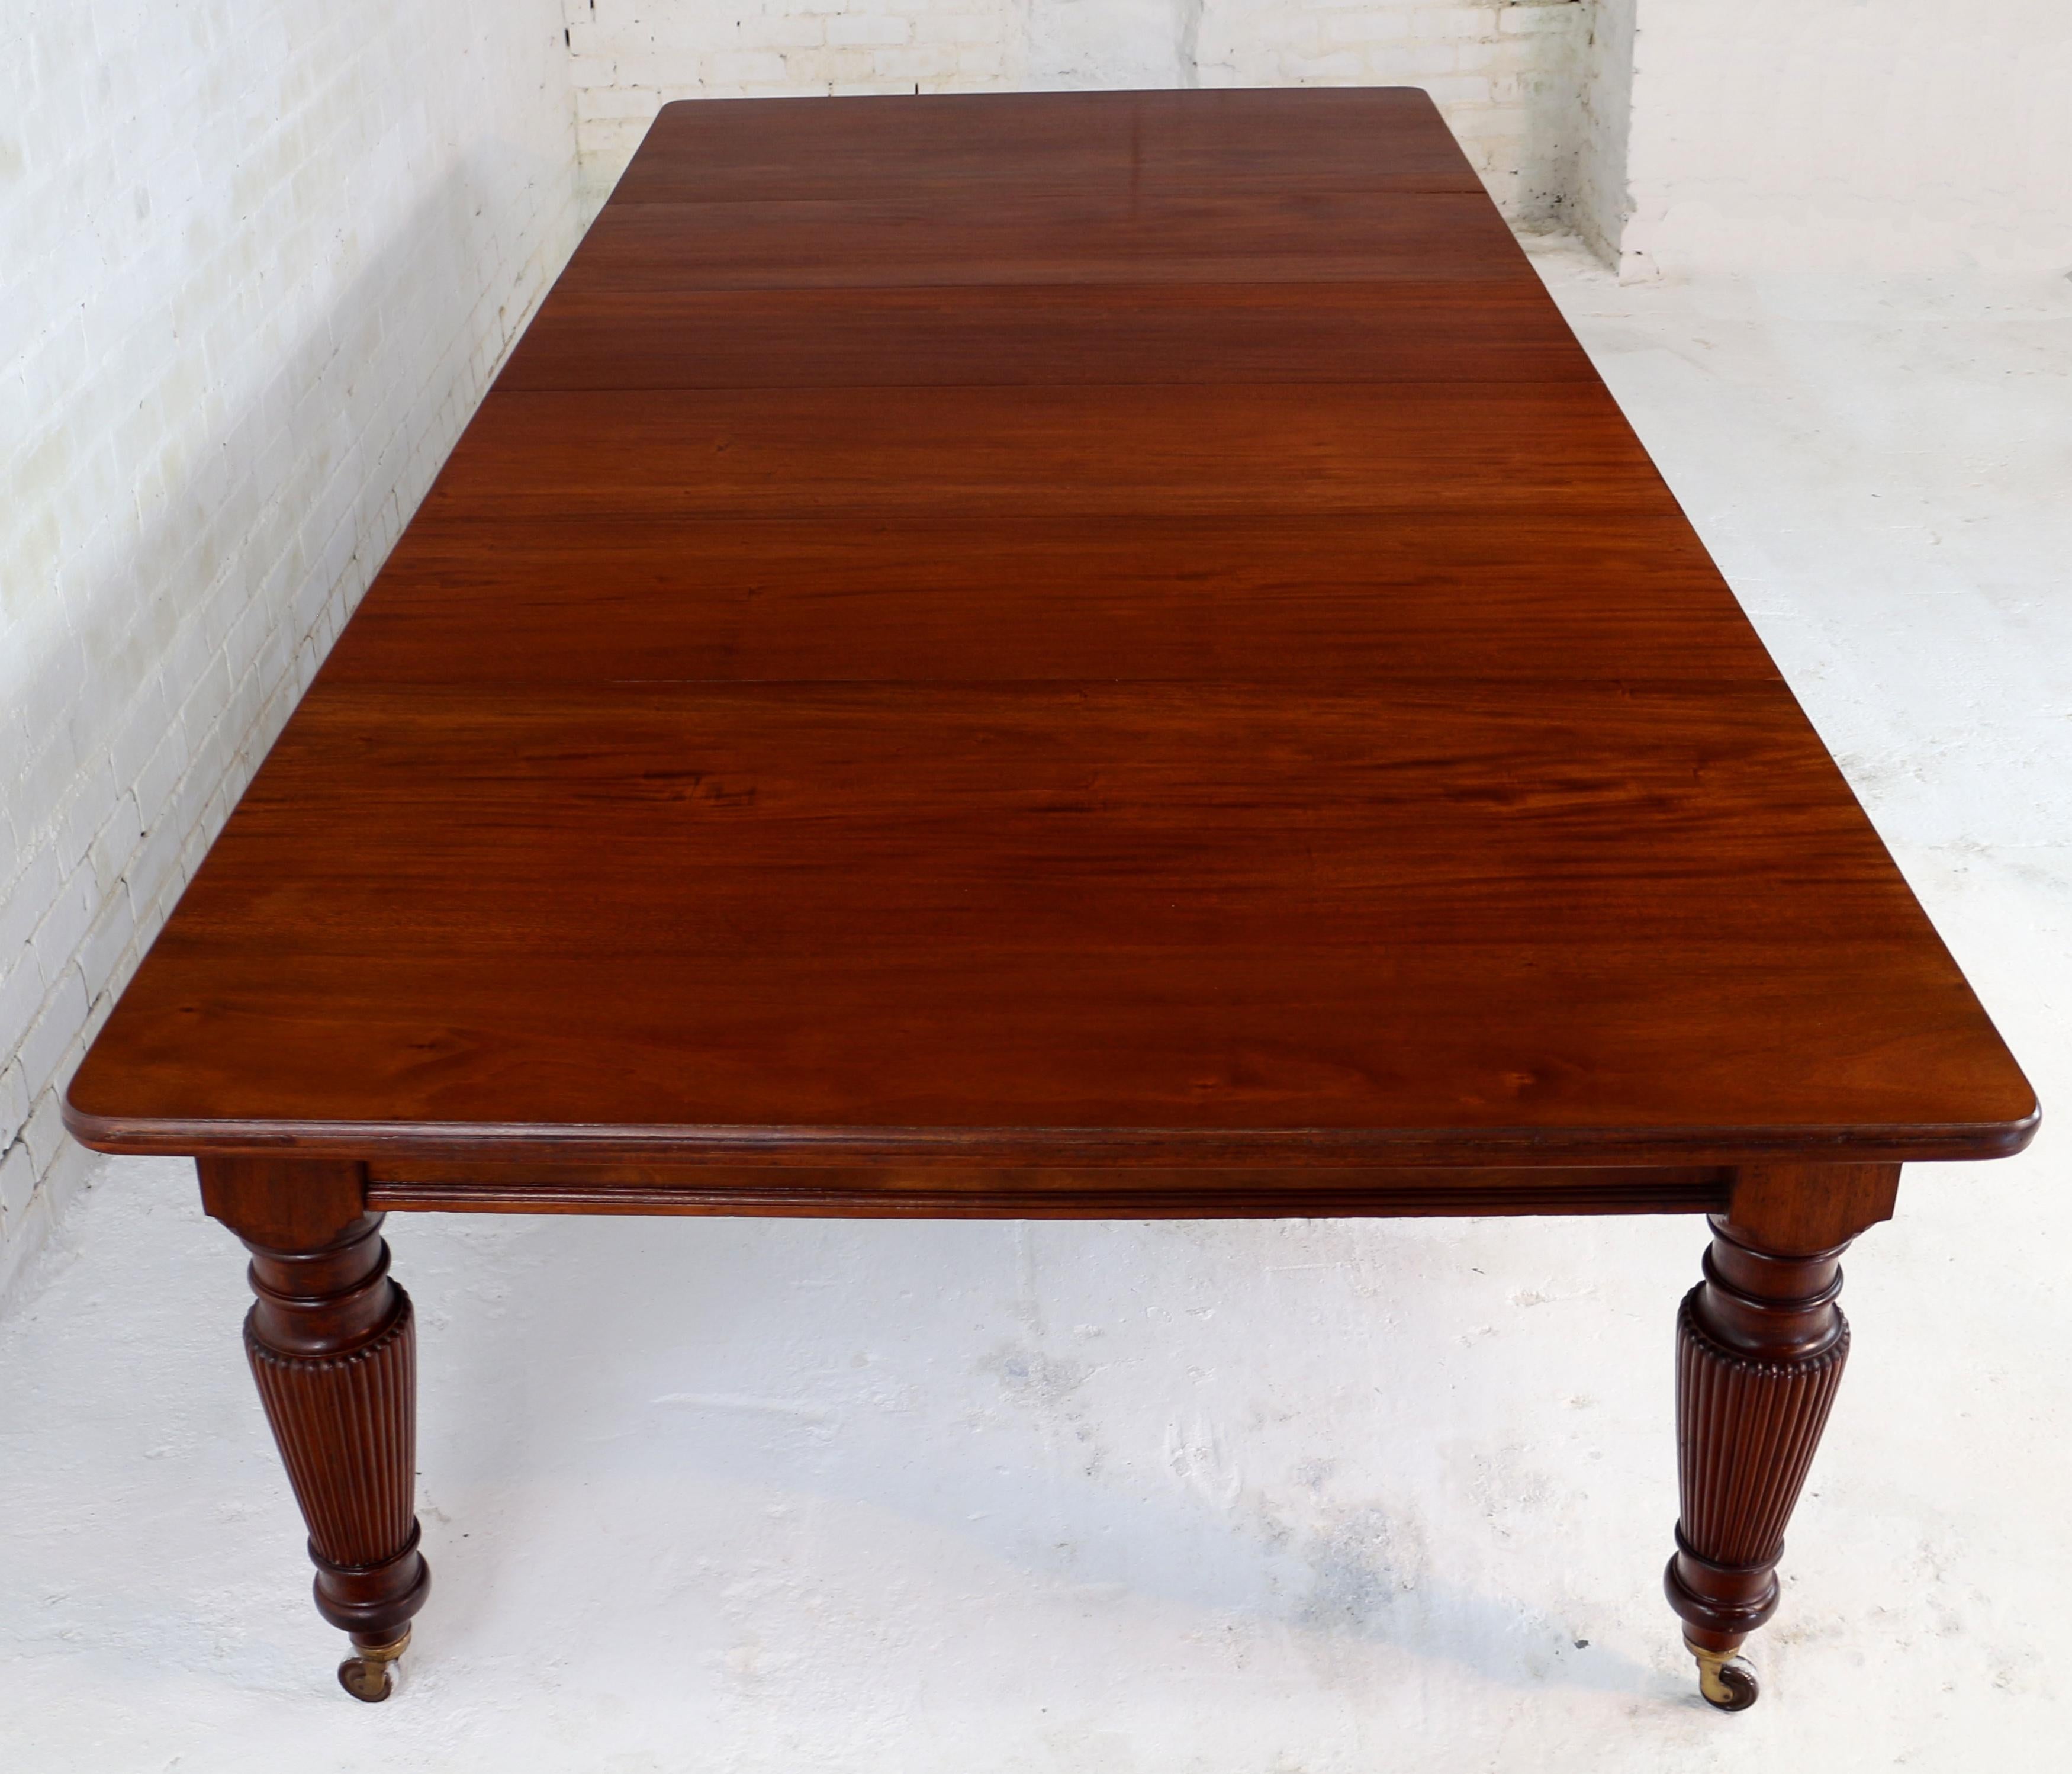 Antique English Victorian Mahogany Extending Dining Table & 4 Leaves 1